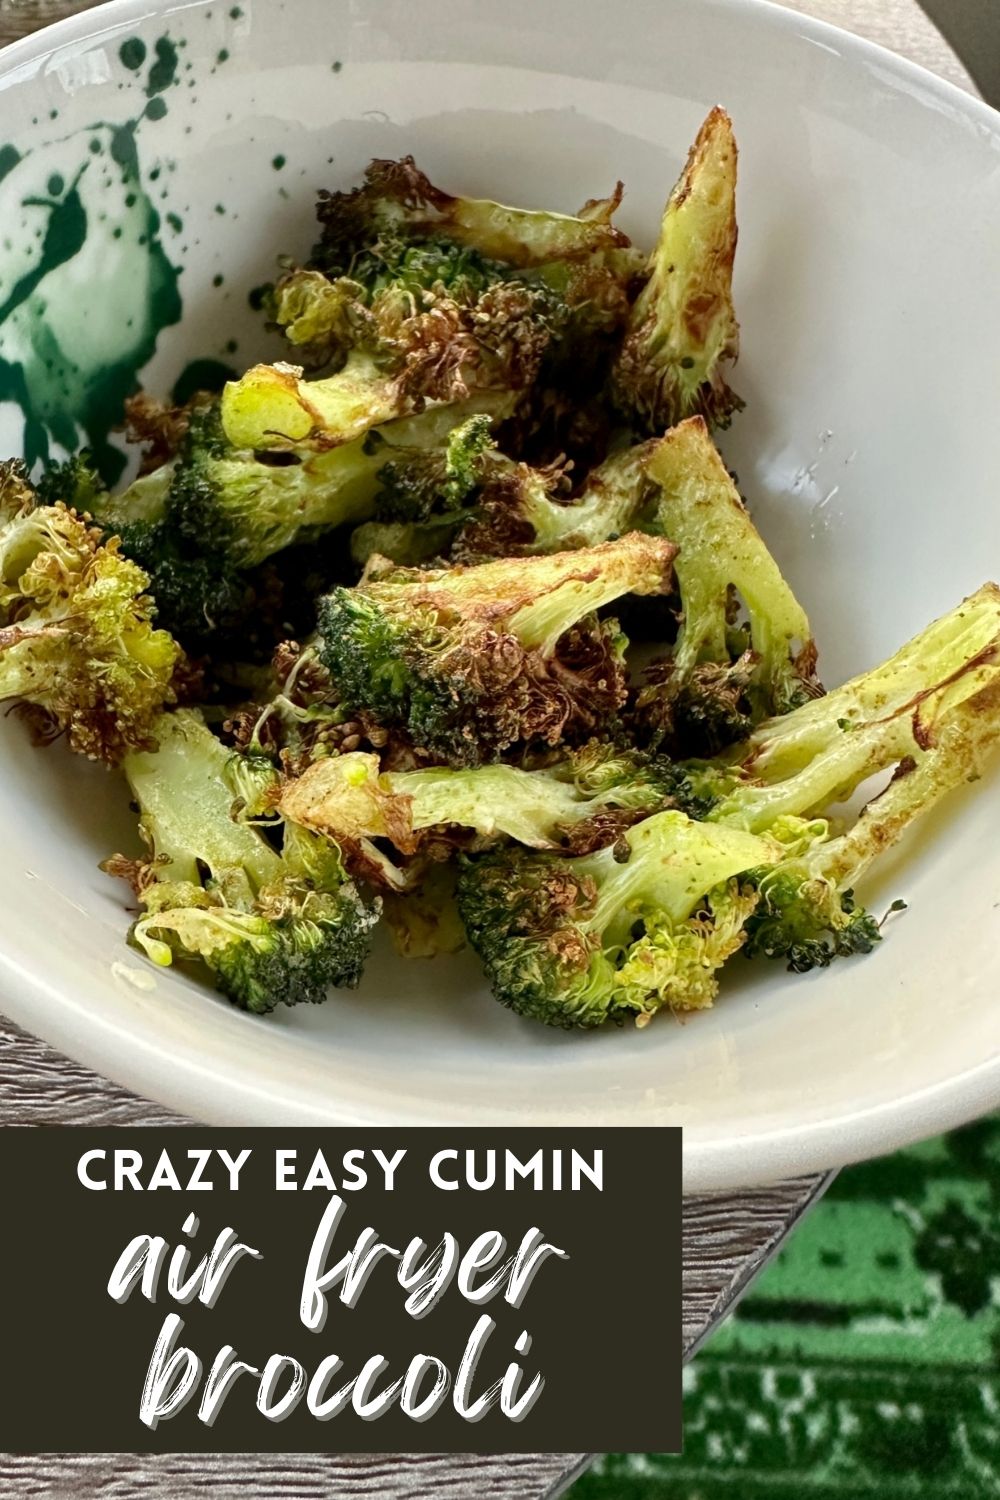 Awesome, Easy Air Fryer Broccoli with Cumin | This cumin roasted broccoli is the best, easiest way to make it...air fried broccoli in just a few minutes, a super easy side dish! Takes under 10 minutes in the air fryer (20 in oven...yes, you can roast this without an air fryer as well). Great detox recipe, easy vegetable recipe, weeknight meal. #broccoli #airfryer #sidedish